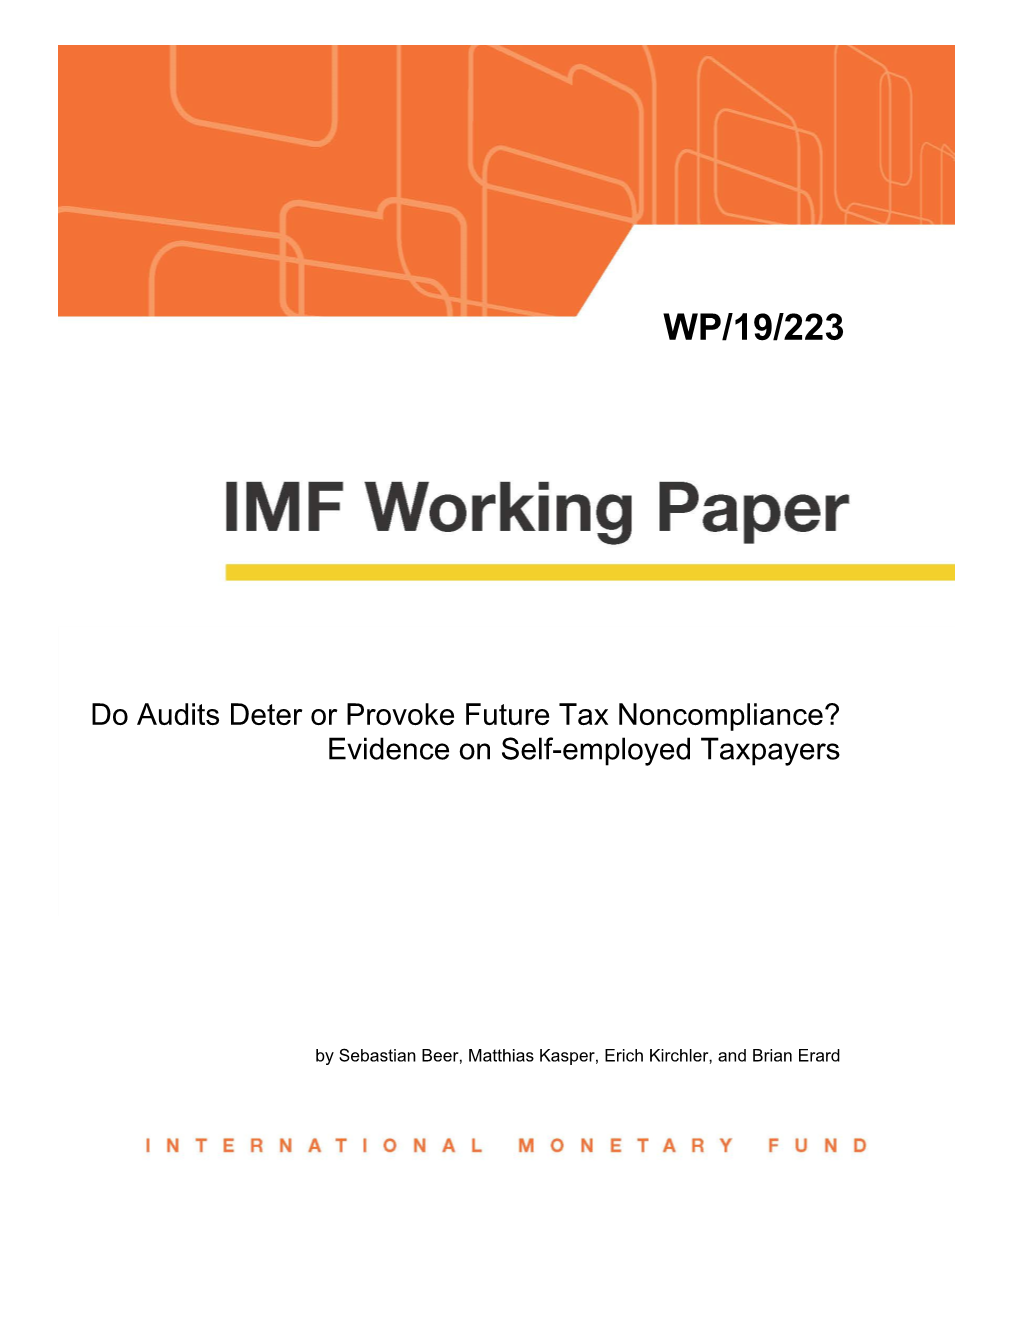 Do Audits Deter Or Provoke Future Tax Noncompliance? Evidence on Self-Employed Taxpayers